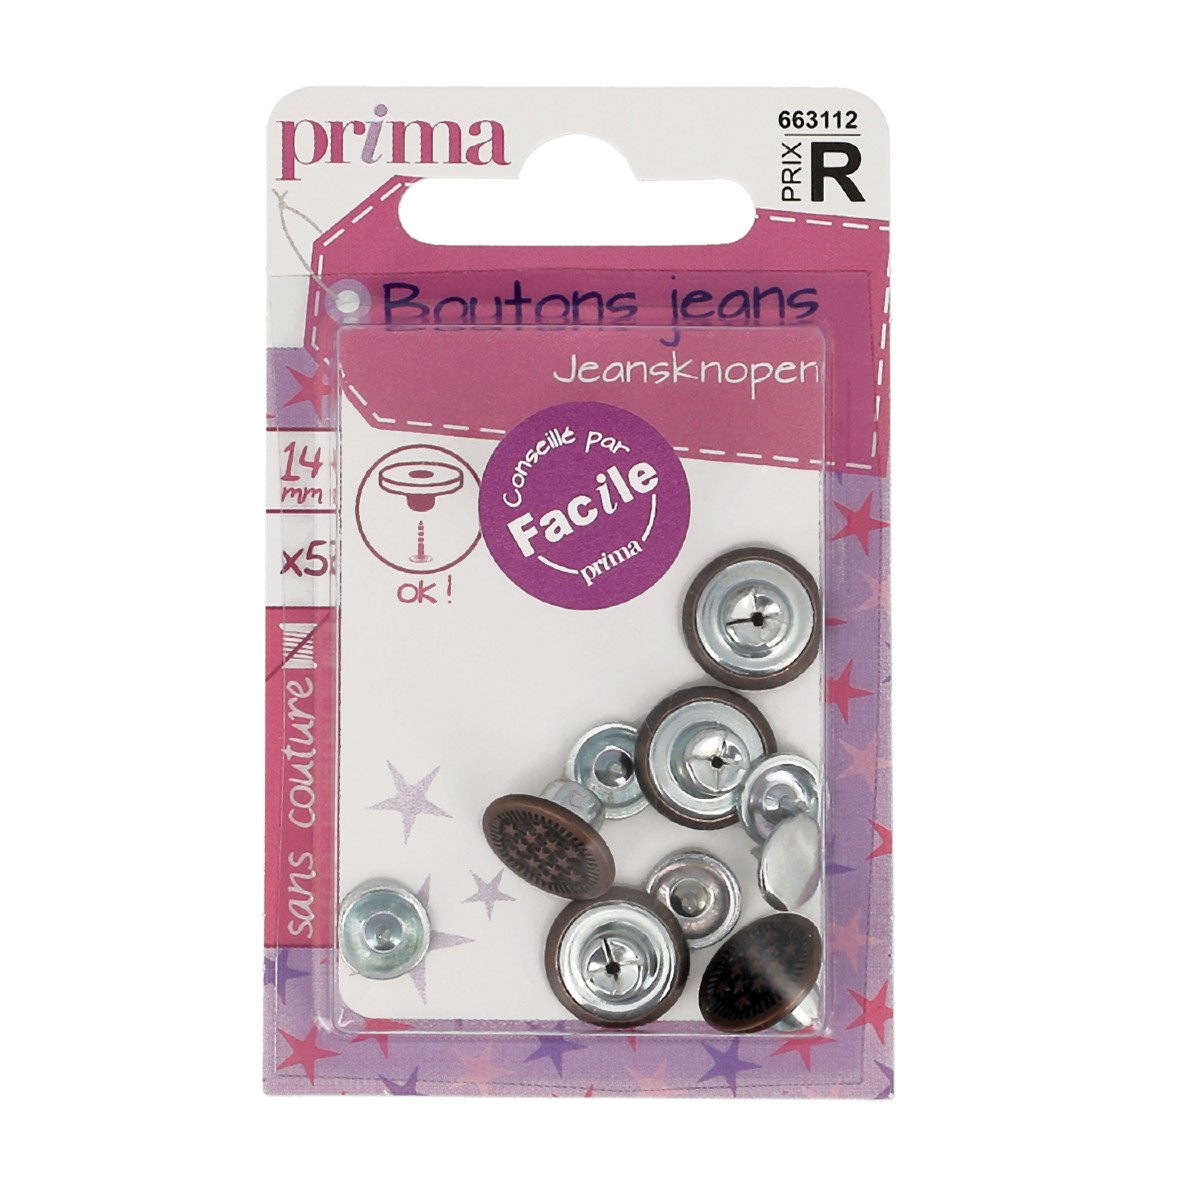 Boutons sans couture 20mm x4